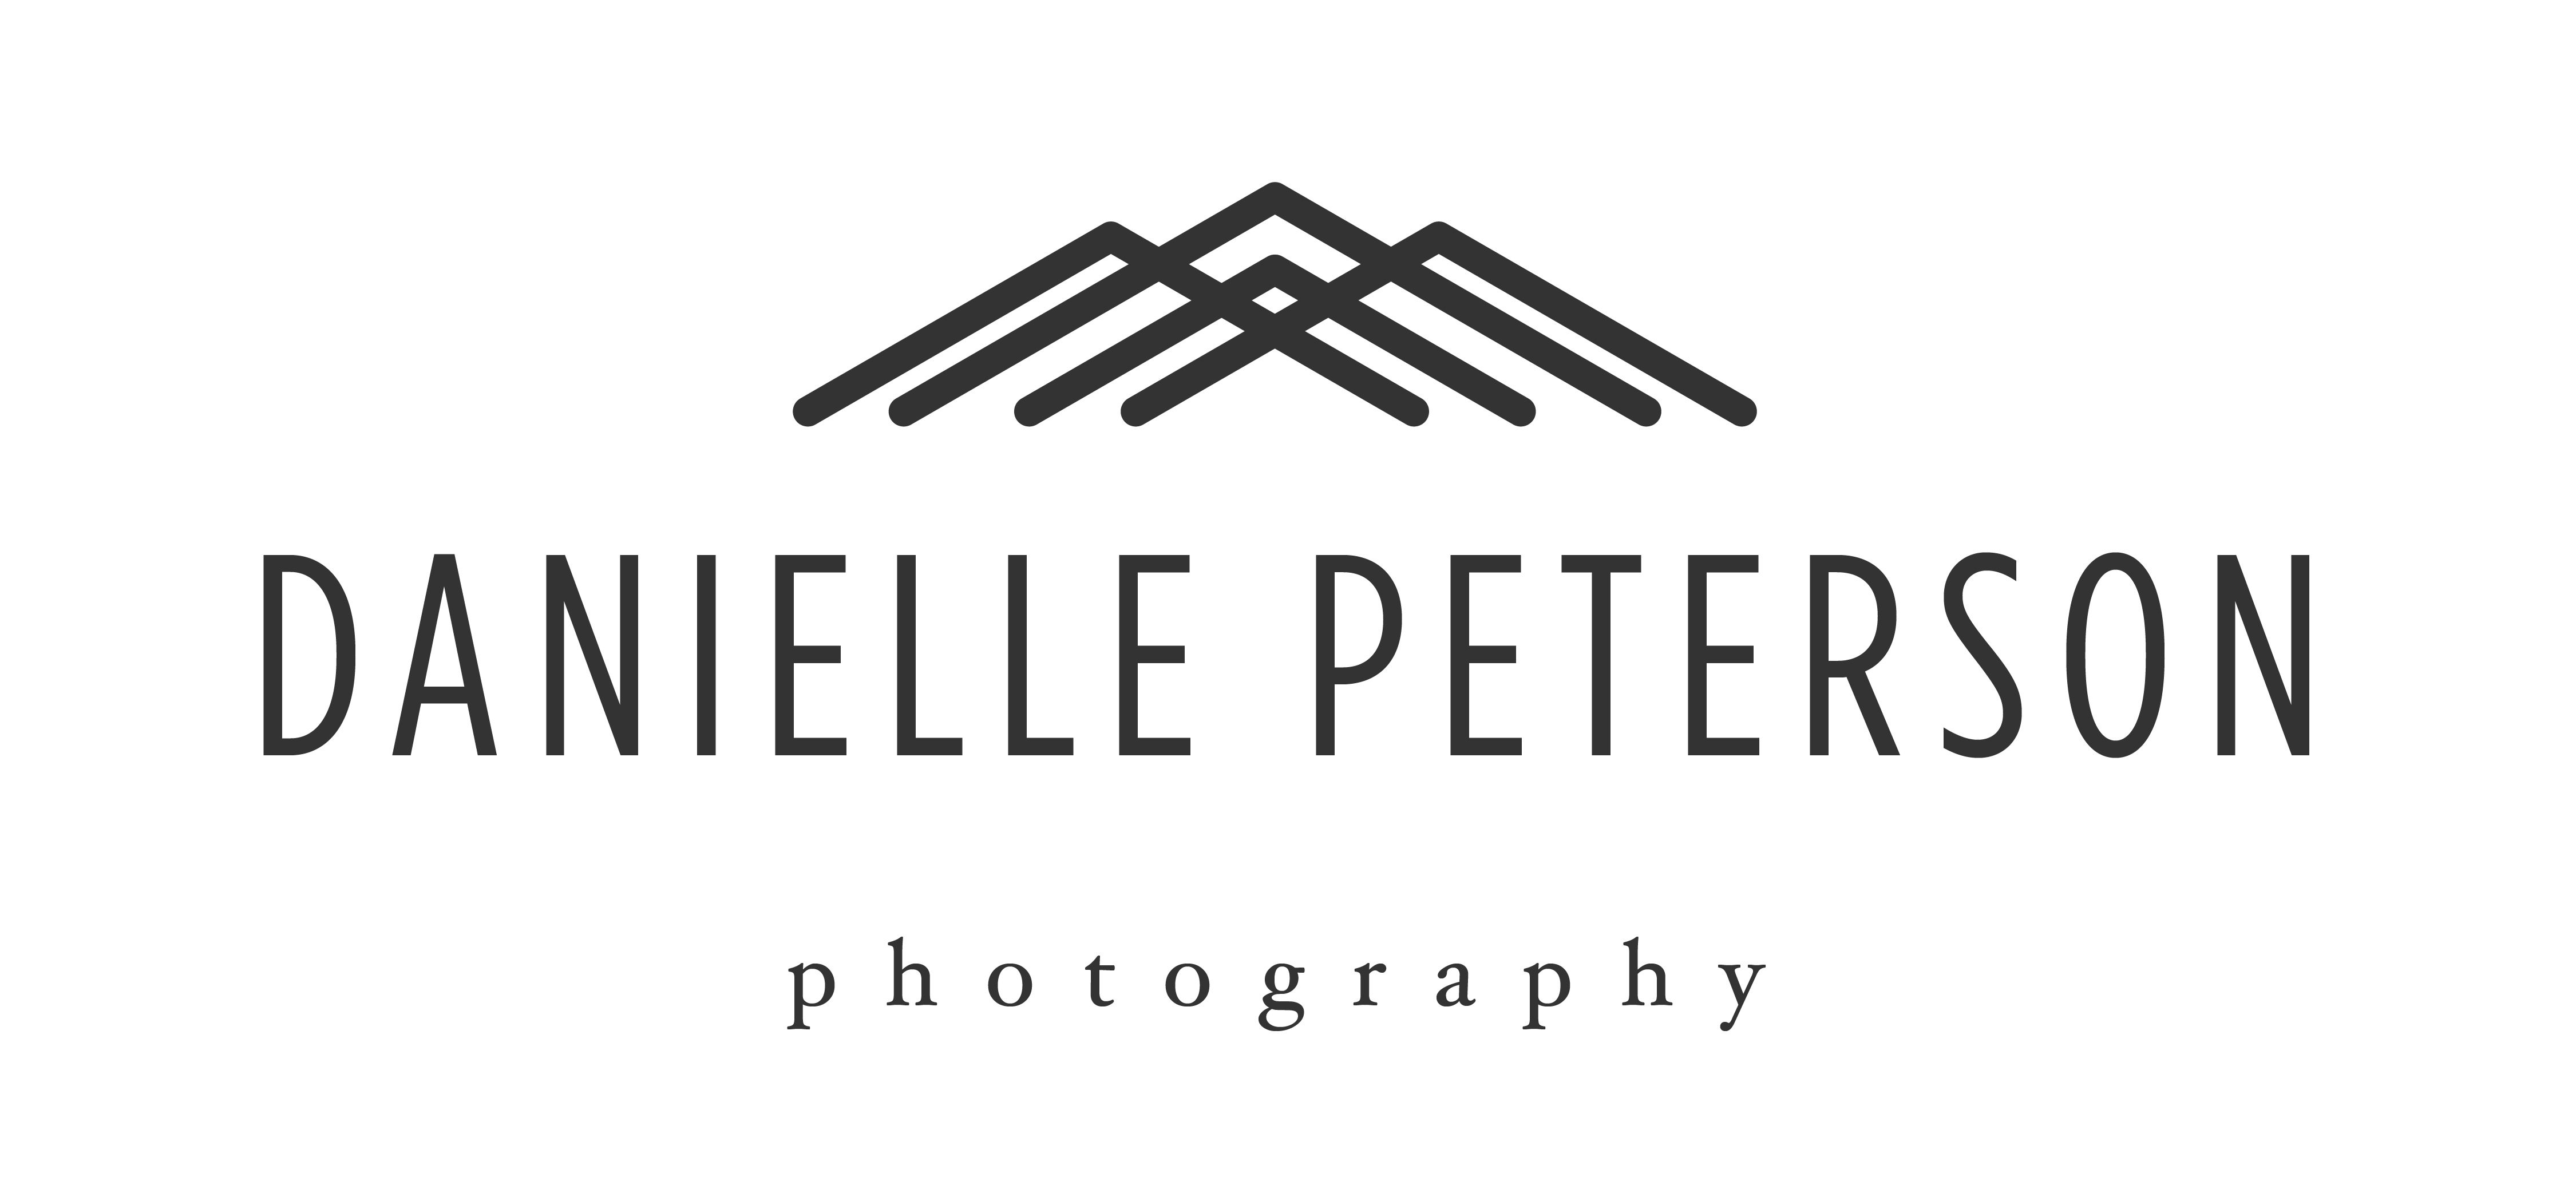 Business logo of Danielle Peterson Photography